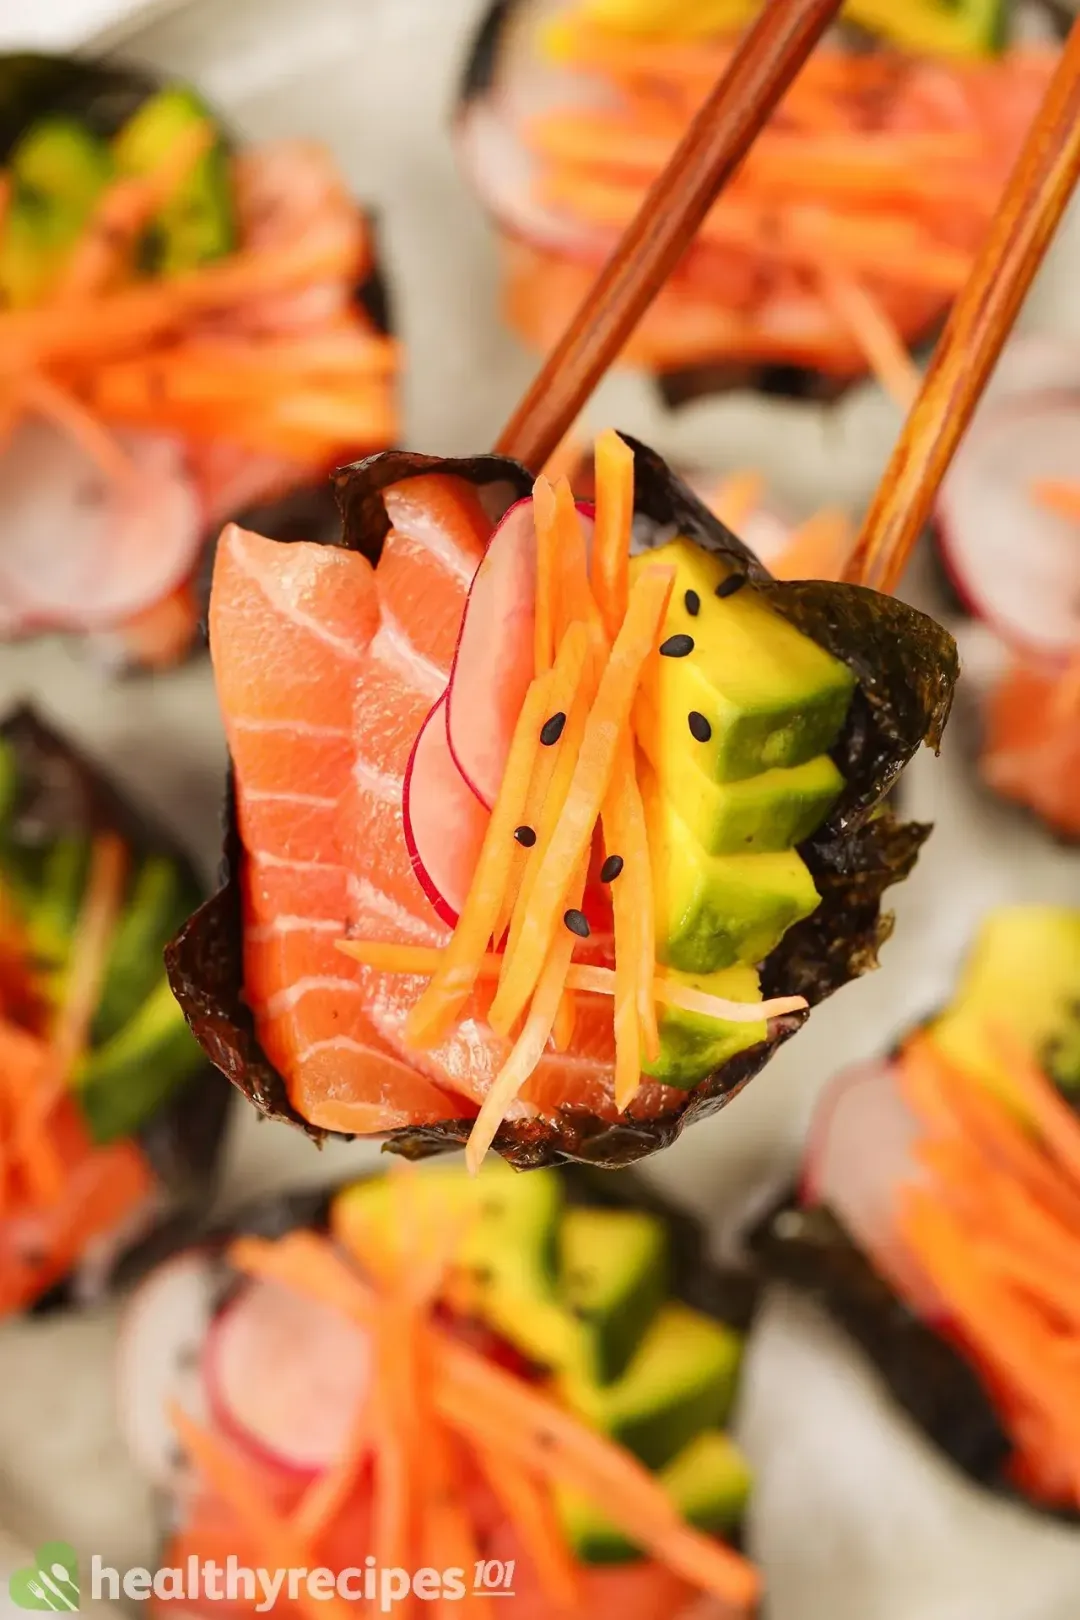 A pair of chopsticks holding a sushi cupcake of salmon, carrot, avocado, and radish hovering six other sushi cupcakes